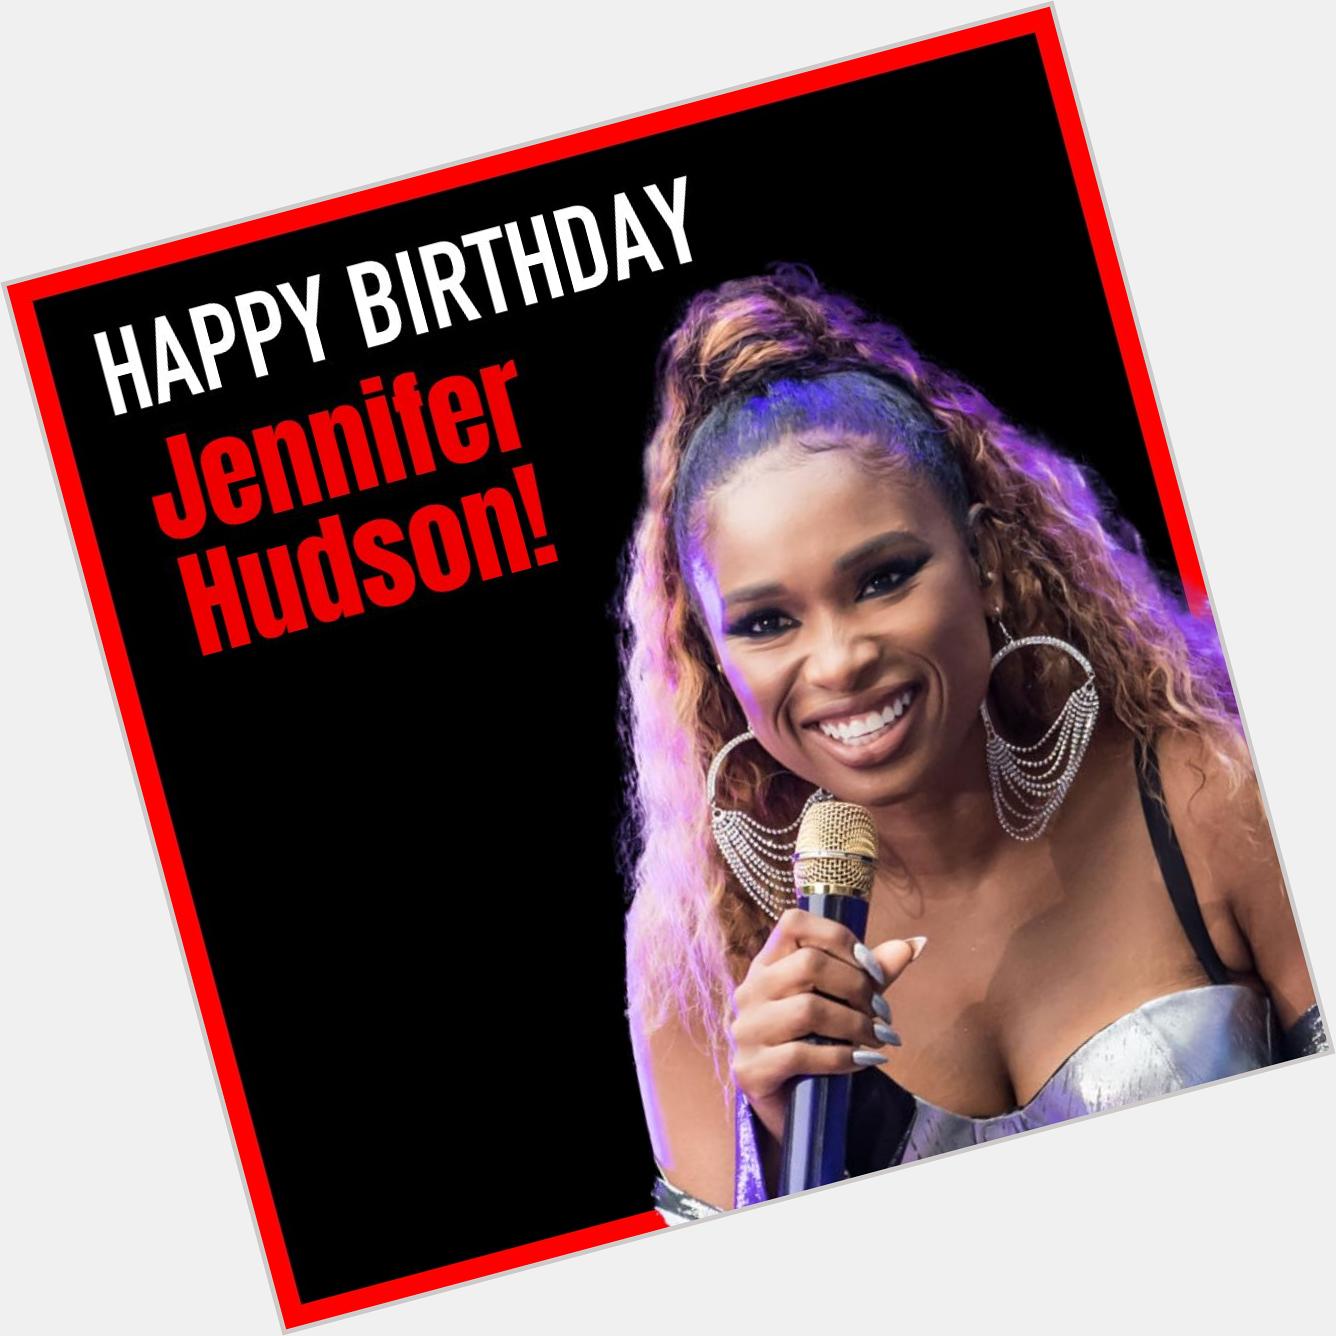 Happy Birthday Jennifer Hudson!! The actress and singer is 38. MORE PHOTOS:  